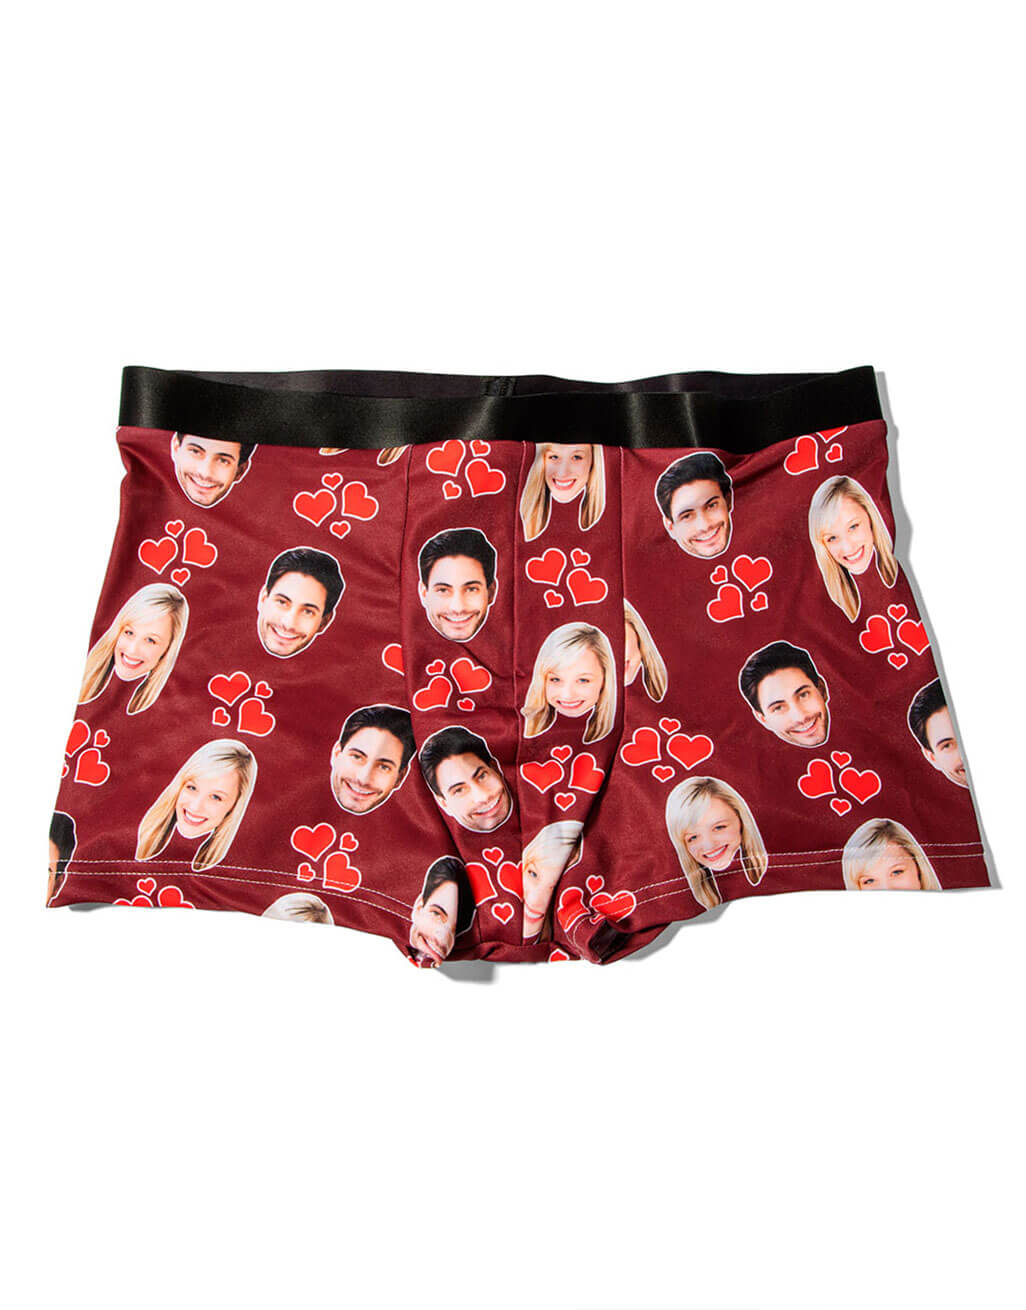 Custom Men's Print Boxer Briefs Underwear With Wife's Face Valentine's Day  Gifts